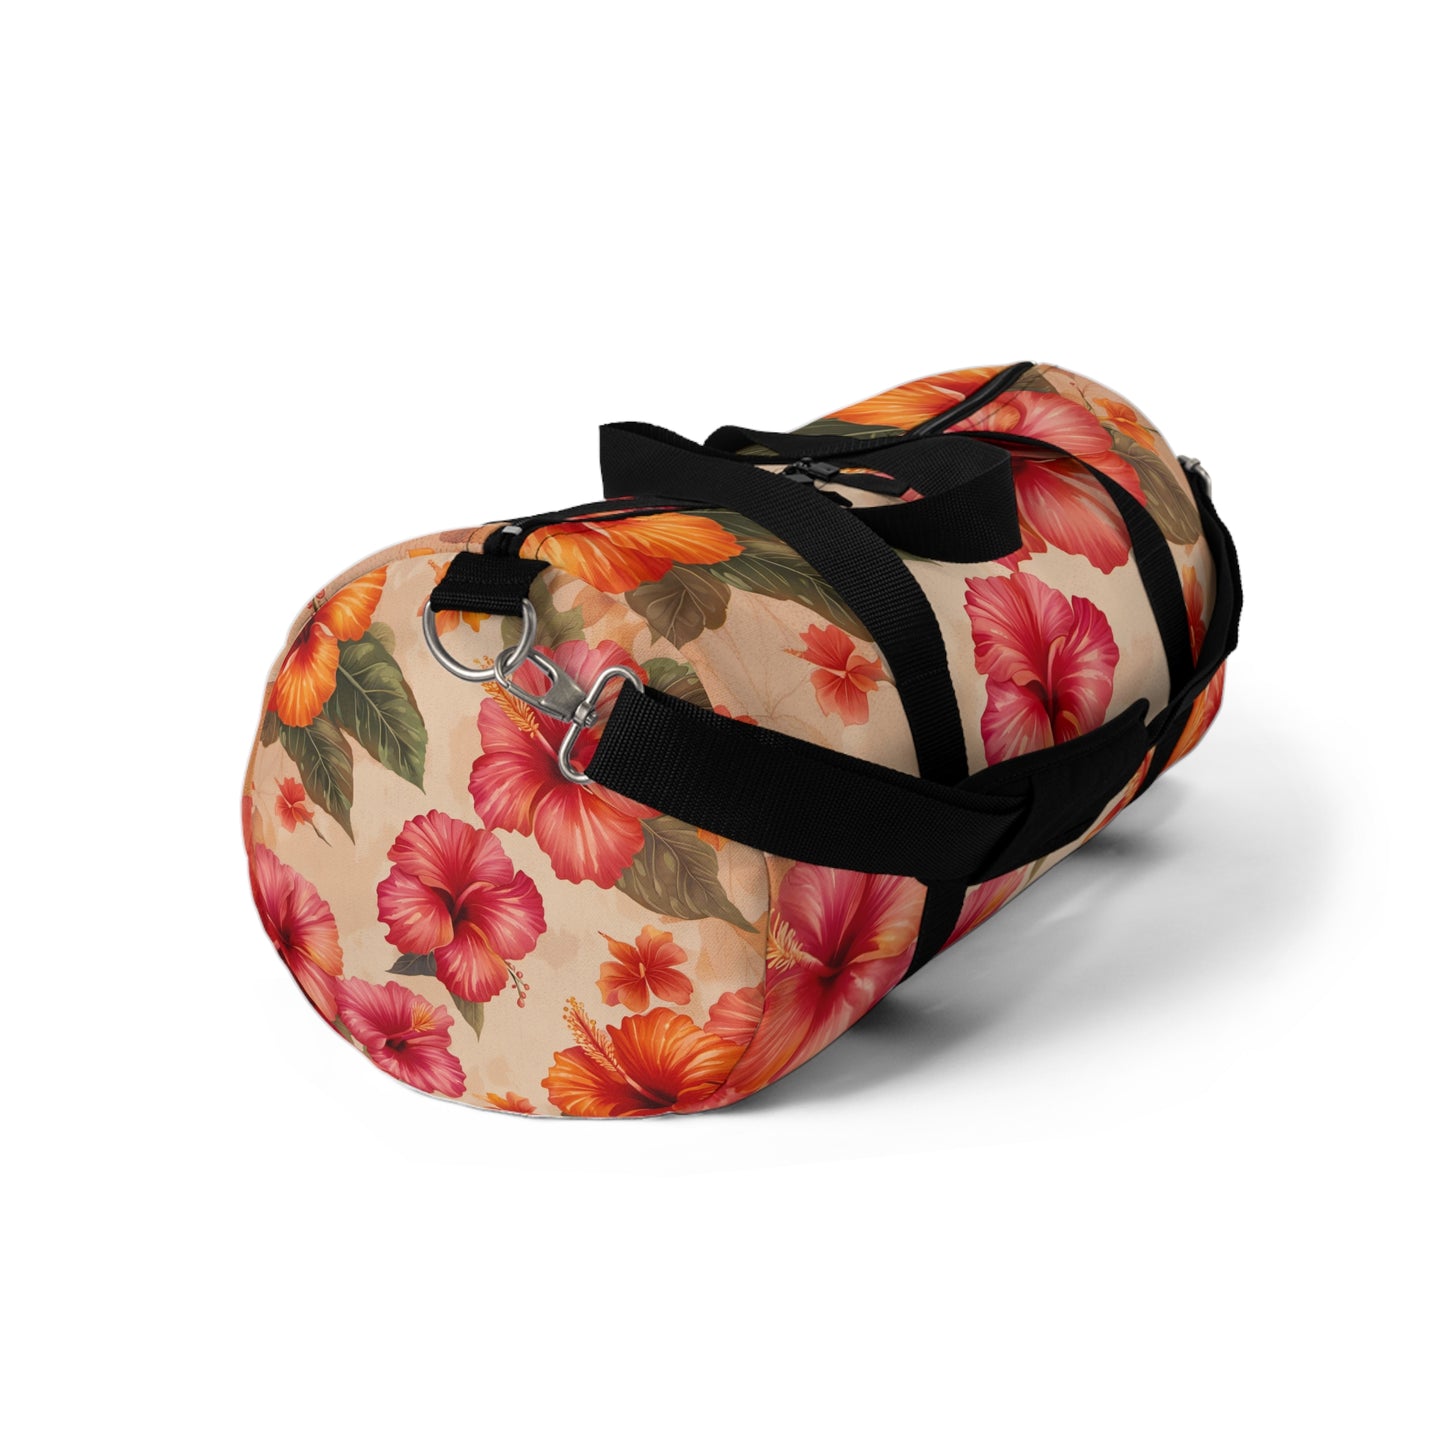 Tropical Themed Travel Accessories and Bags, Hibiscus Flowers Print Duffle Bag